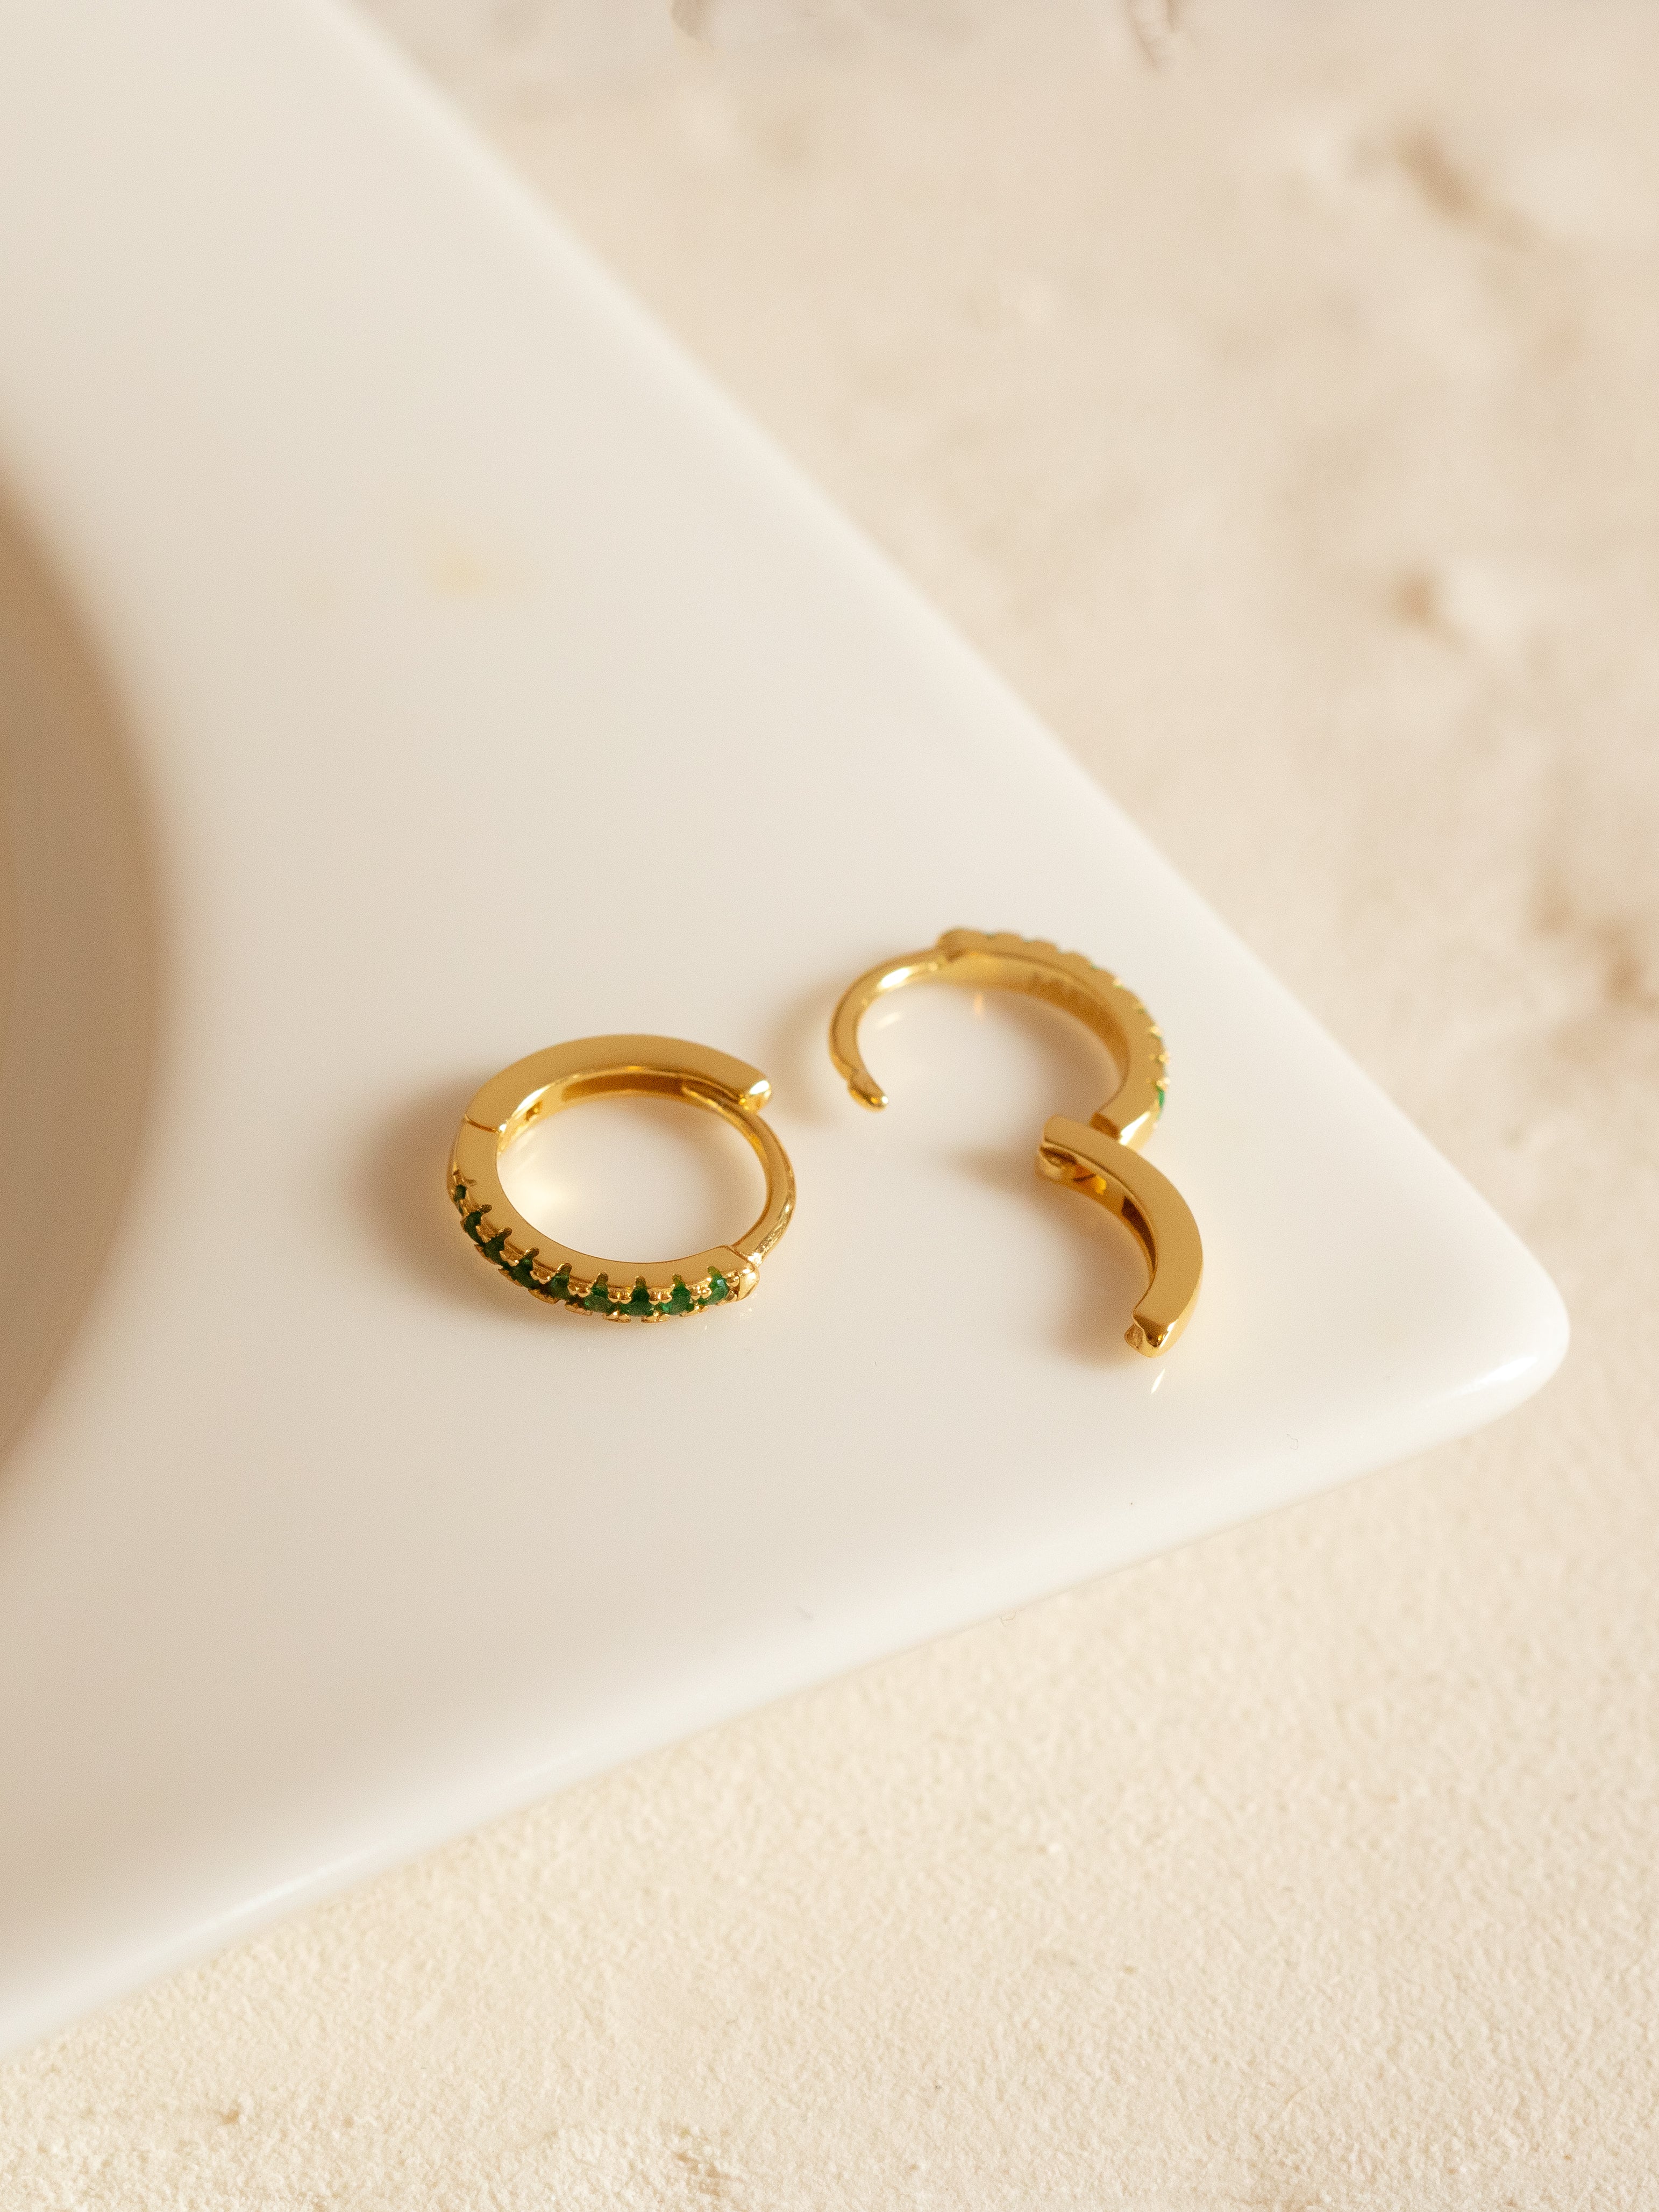 Gold Small Hoop Earrings With Emerald Green Stones